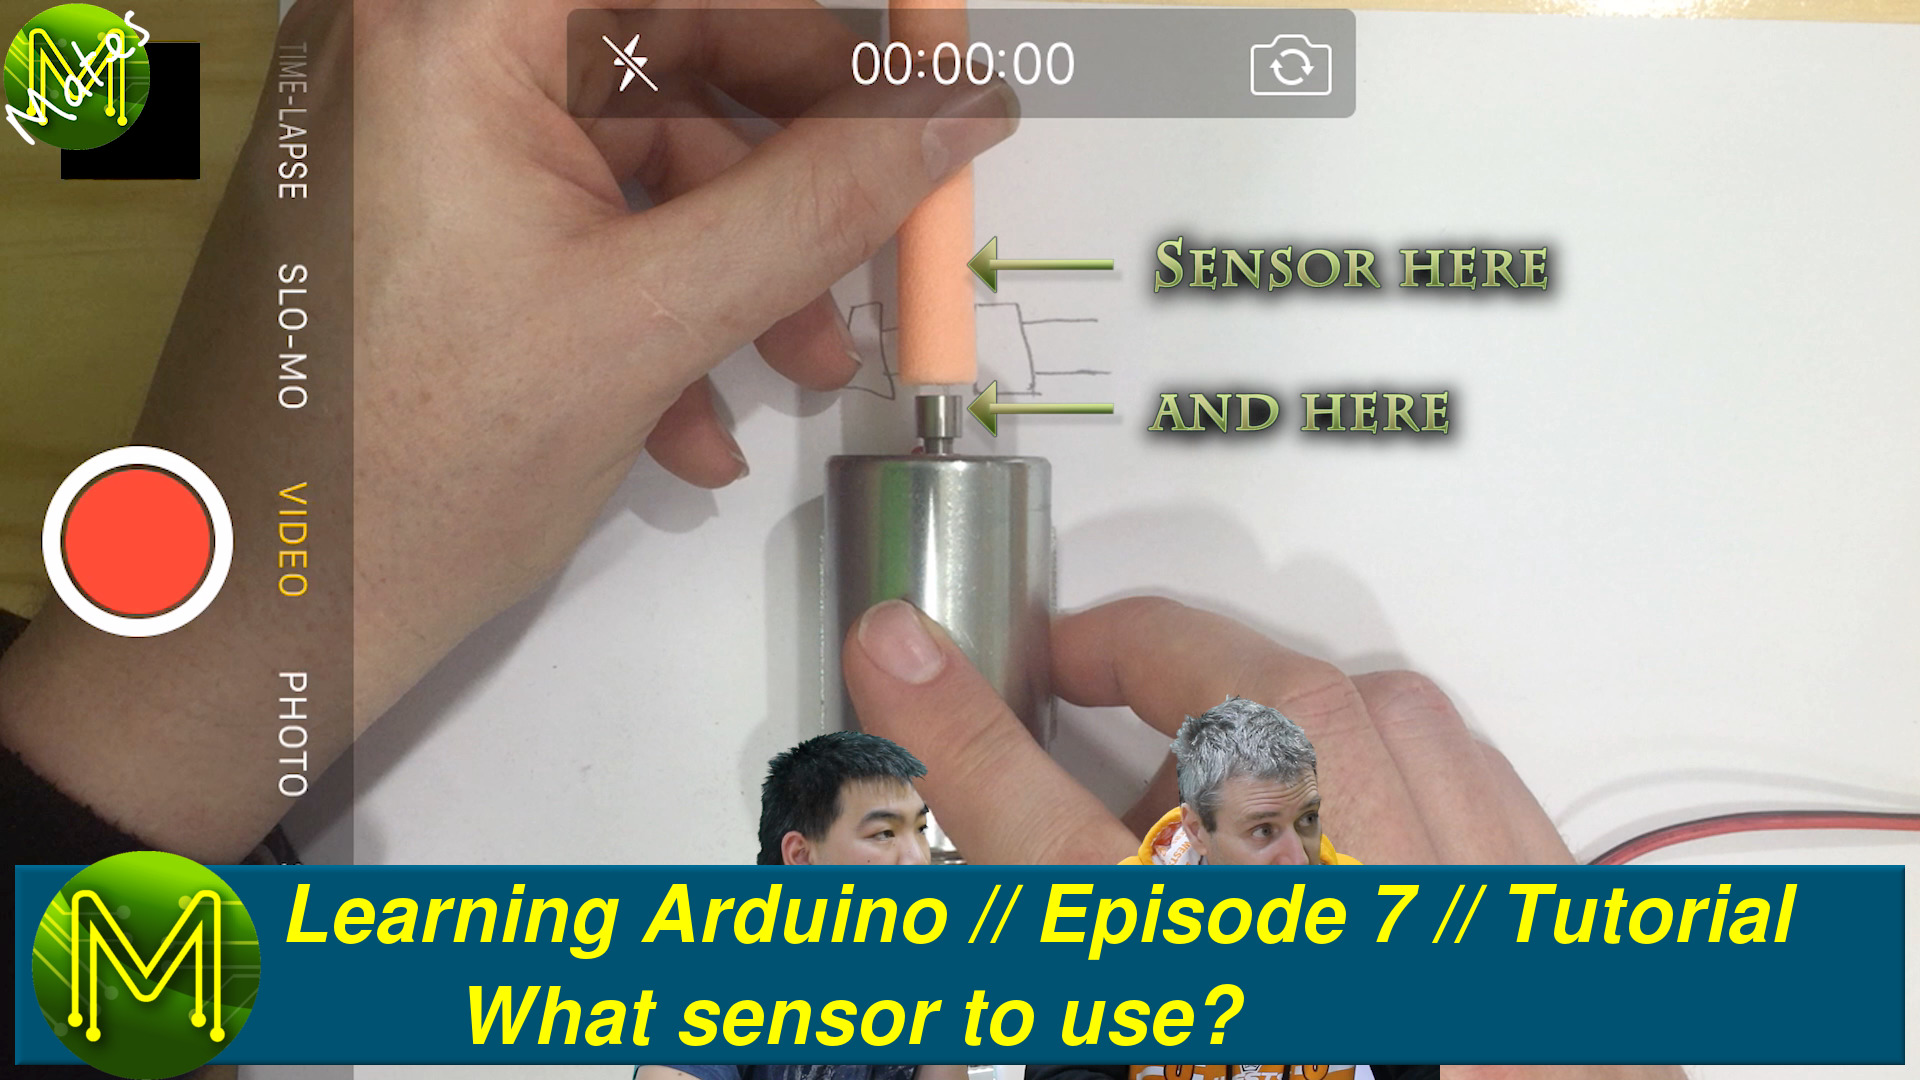 Learning Arduino: What sensor to use? // Episode 7 // Tutorial